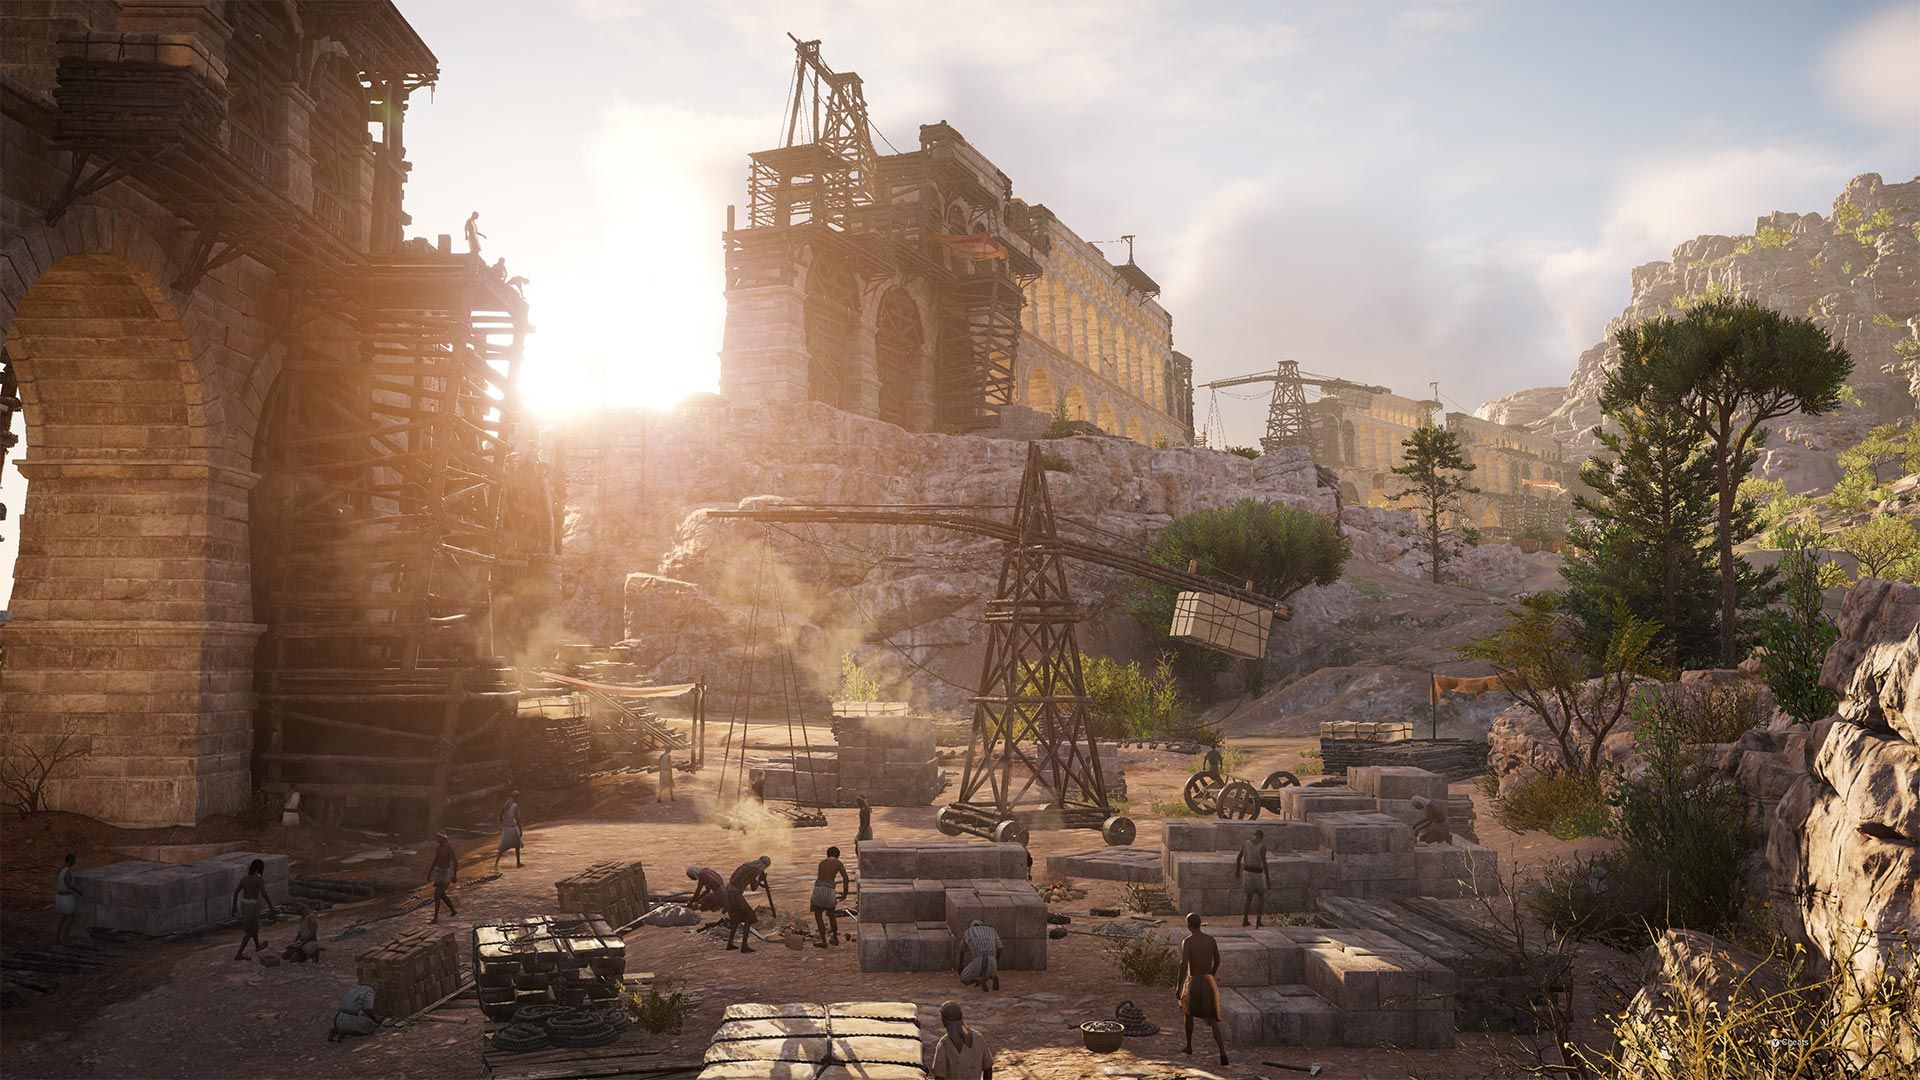 Why Three Egyptologists Are Teaching History Through Assassin's Creed  Origins